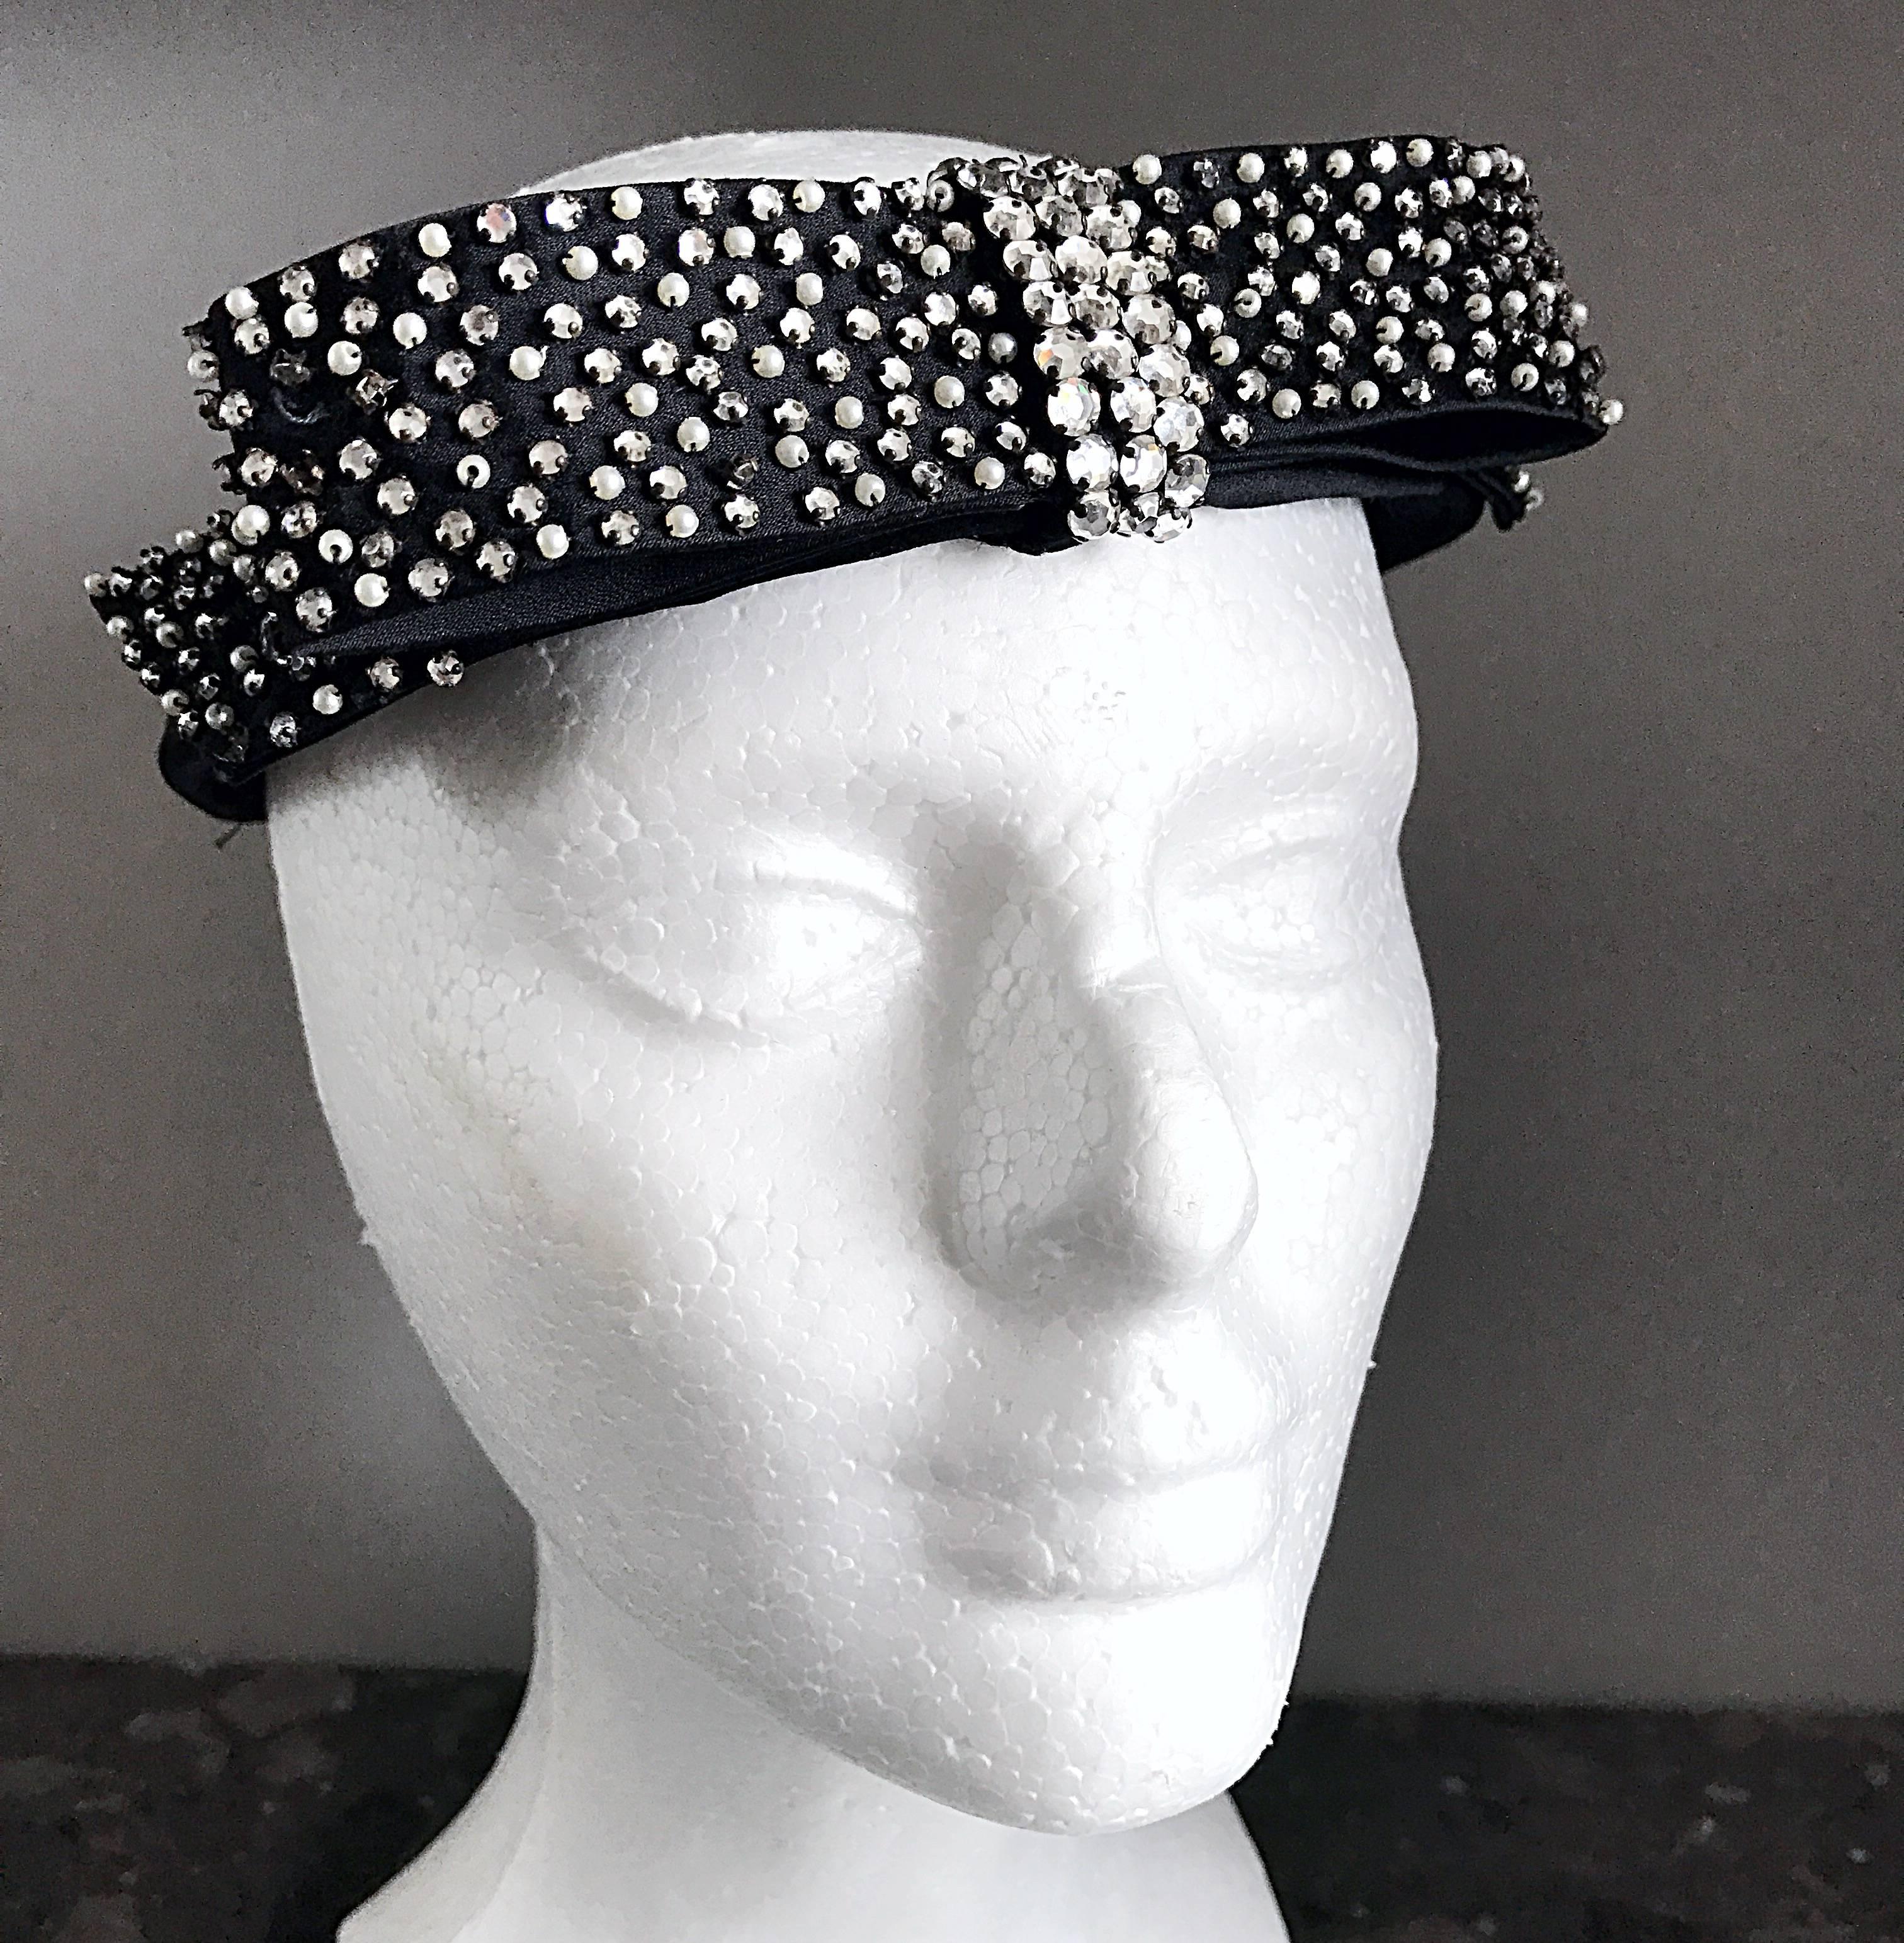 Chic vintage I MAGNIN black silk halo hat! Features a front bow encrusted with rhinestones and mini pearls. Soft black silk satin. Looks great with jeans, or with a dress. Actually, a quite versatile piece! In great condition, with a couple of